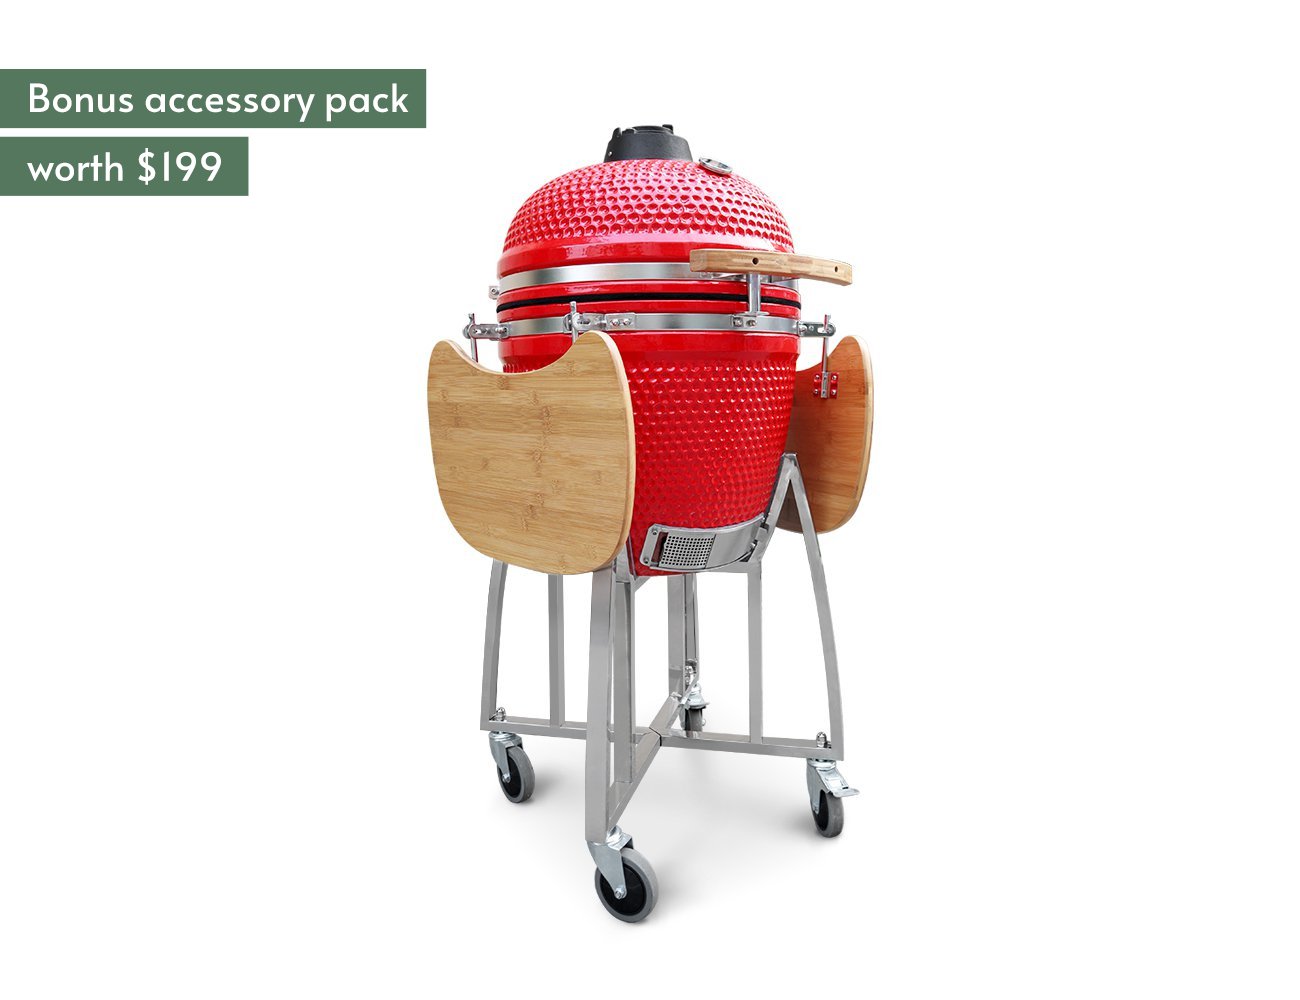 21" Kamado Red BBQ + Accessory Pack